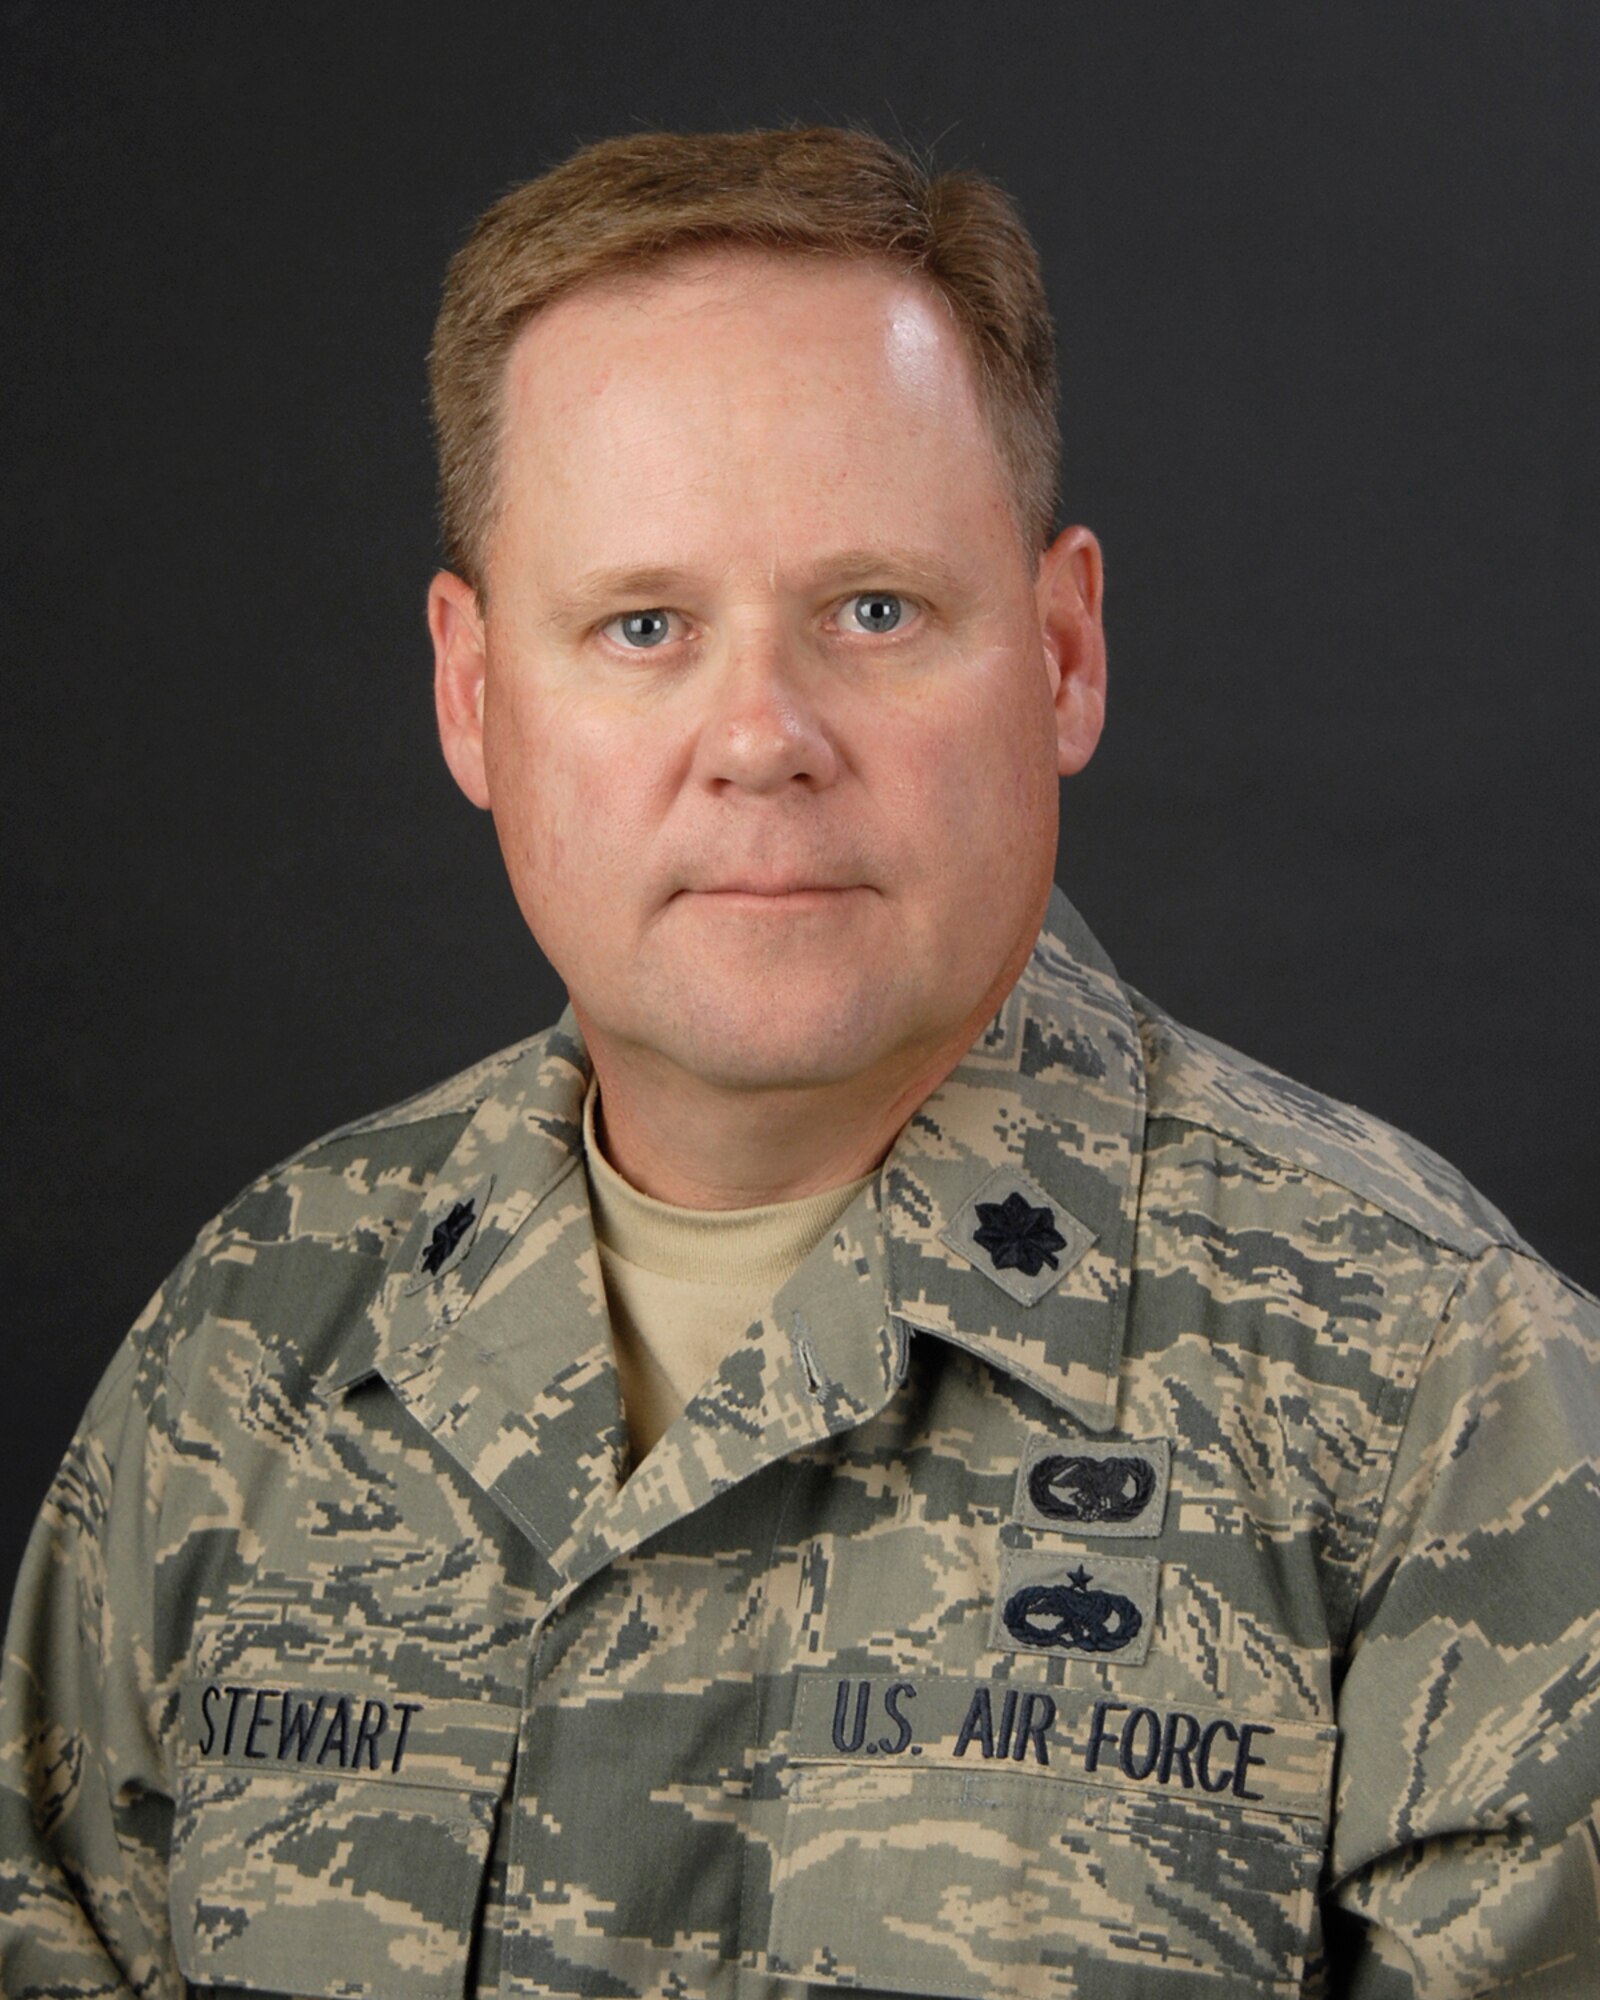 Portrait of Lt. Col. Allen Stewart, Commander of the 169th Logistics Readiness Squadron at McEntire Joint National Guard Base, S.C.
(SCANG photo by Tech. Sgt. Caycee Watson/Released)